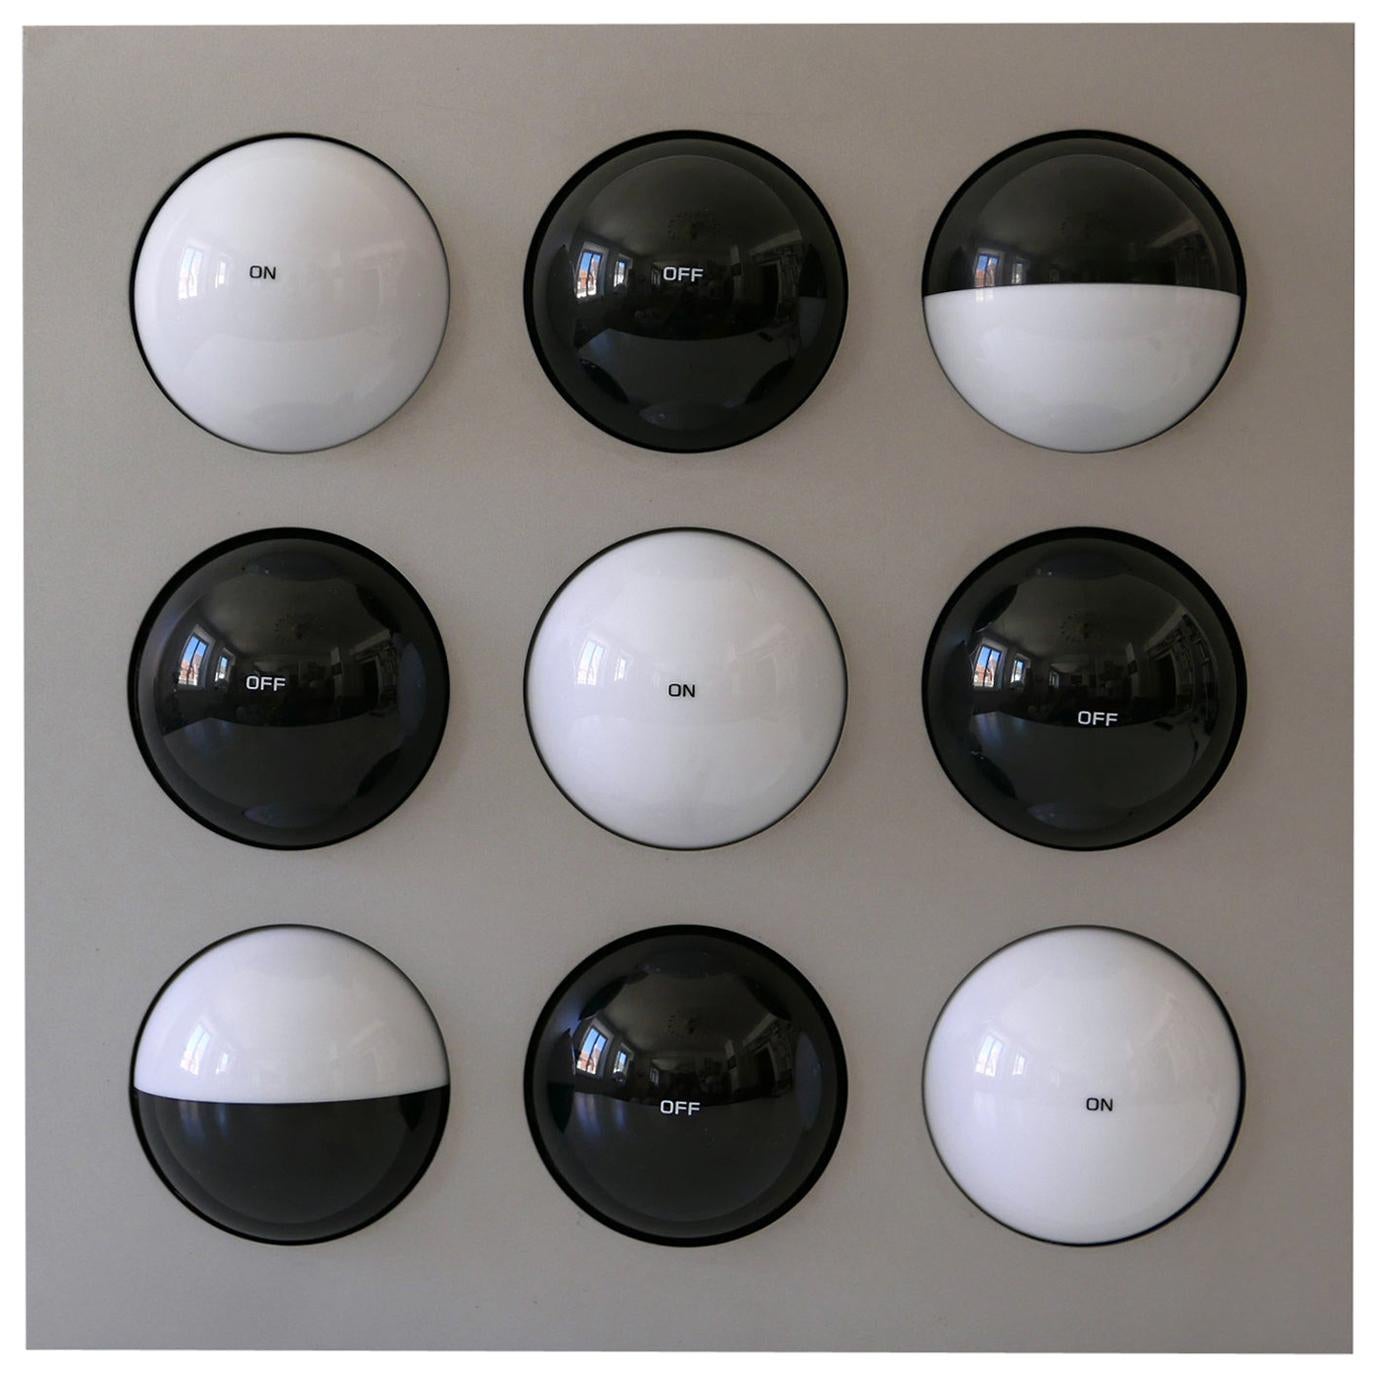 Paul Talman On/Off Light Object or Wall Lamp Fifty Fifty by Interaktives Licht